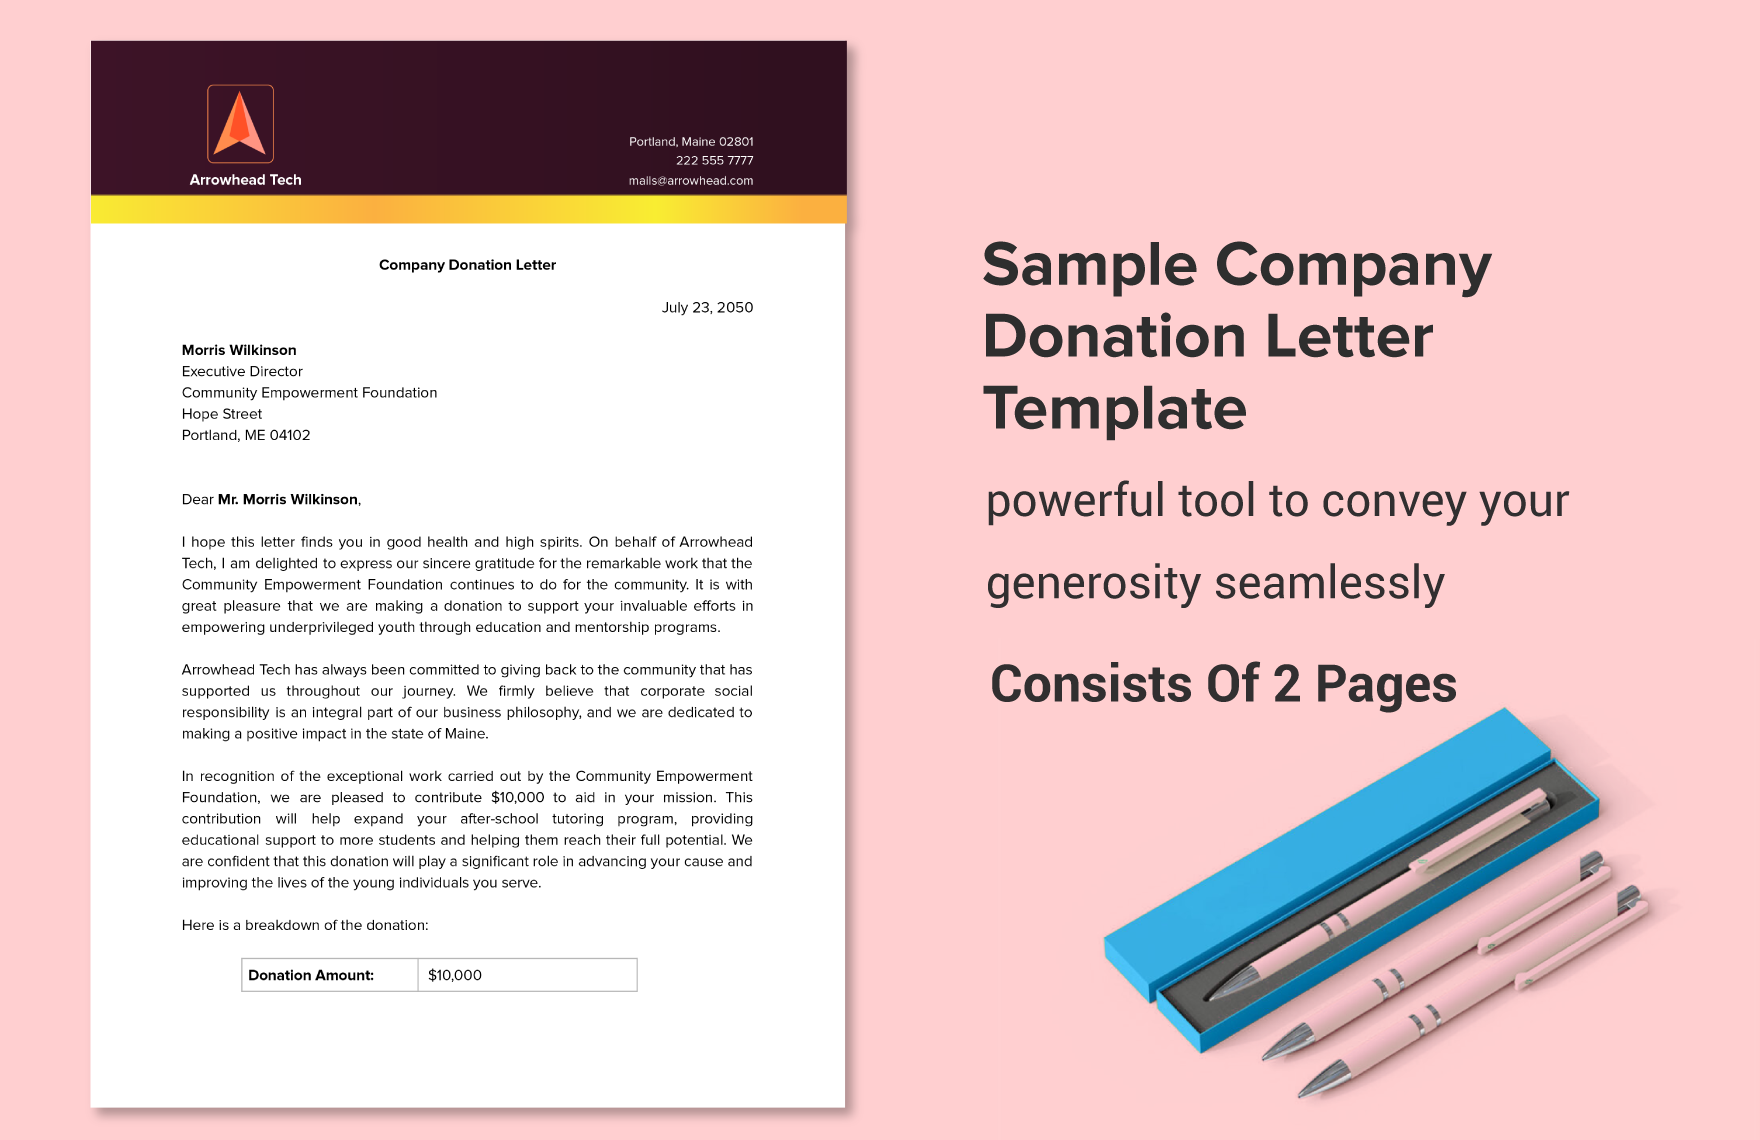 Sample Company Donation Letter Template